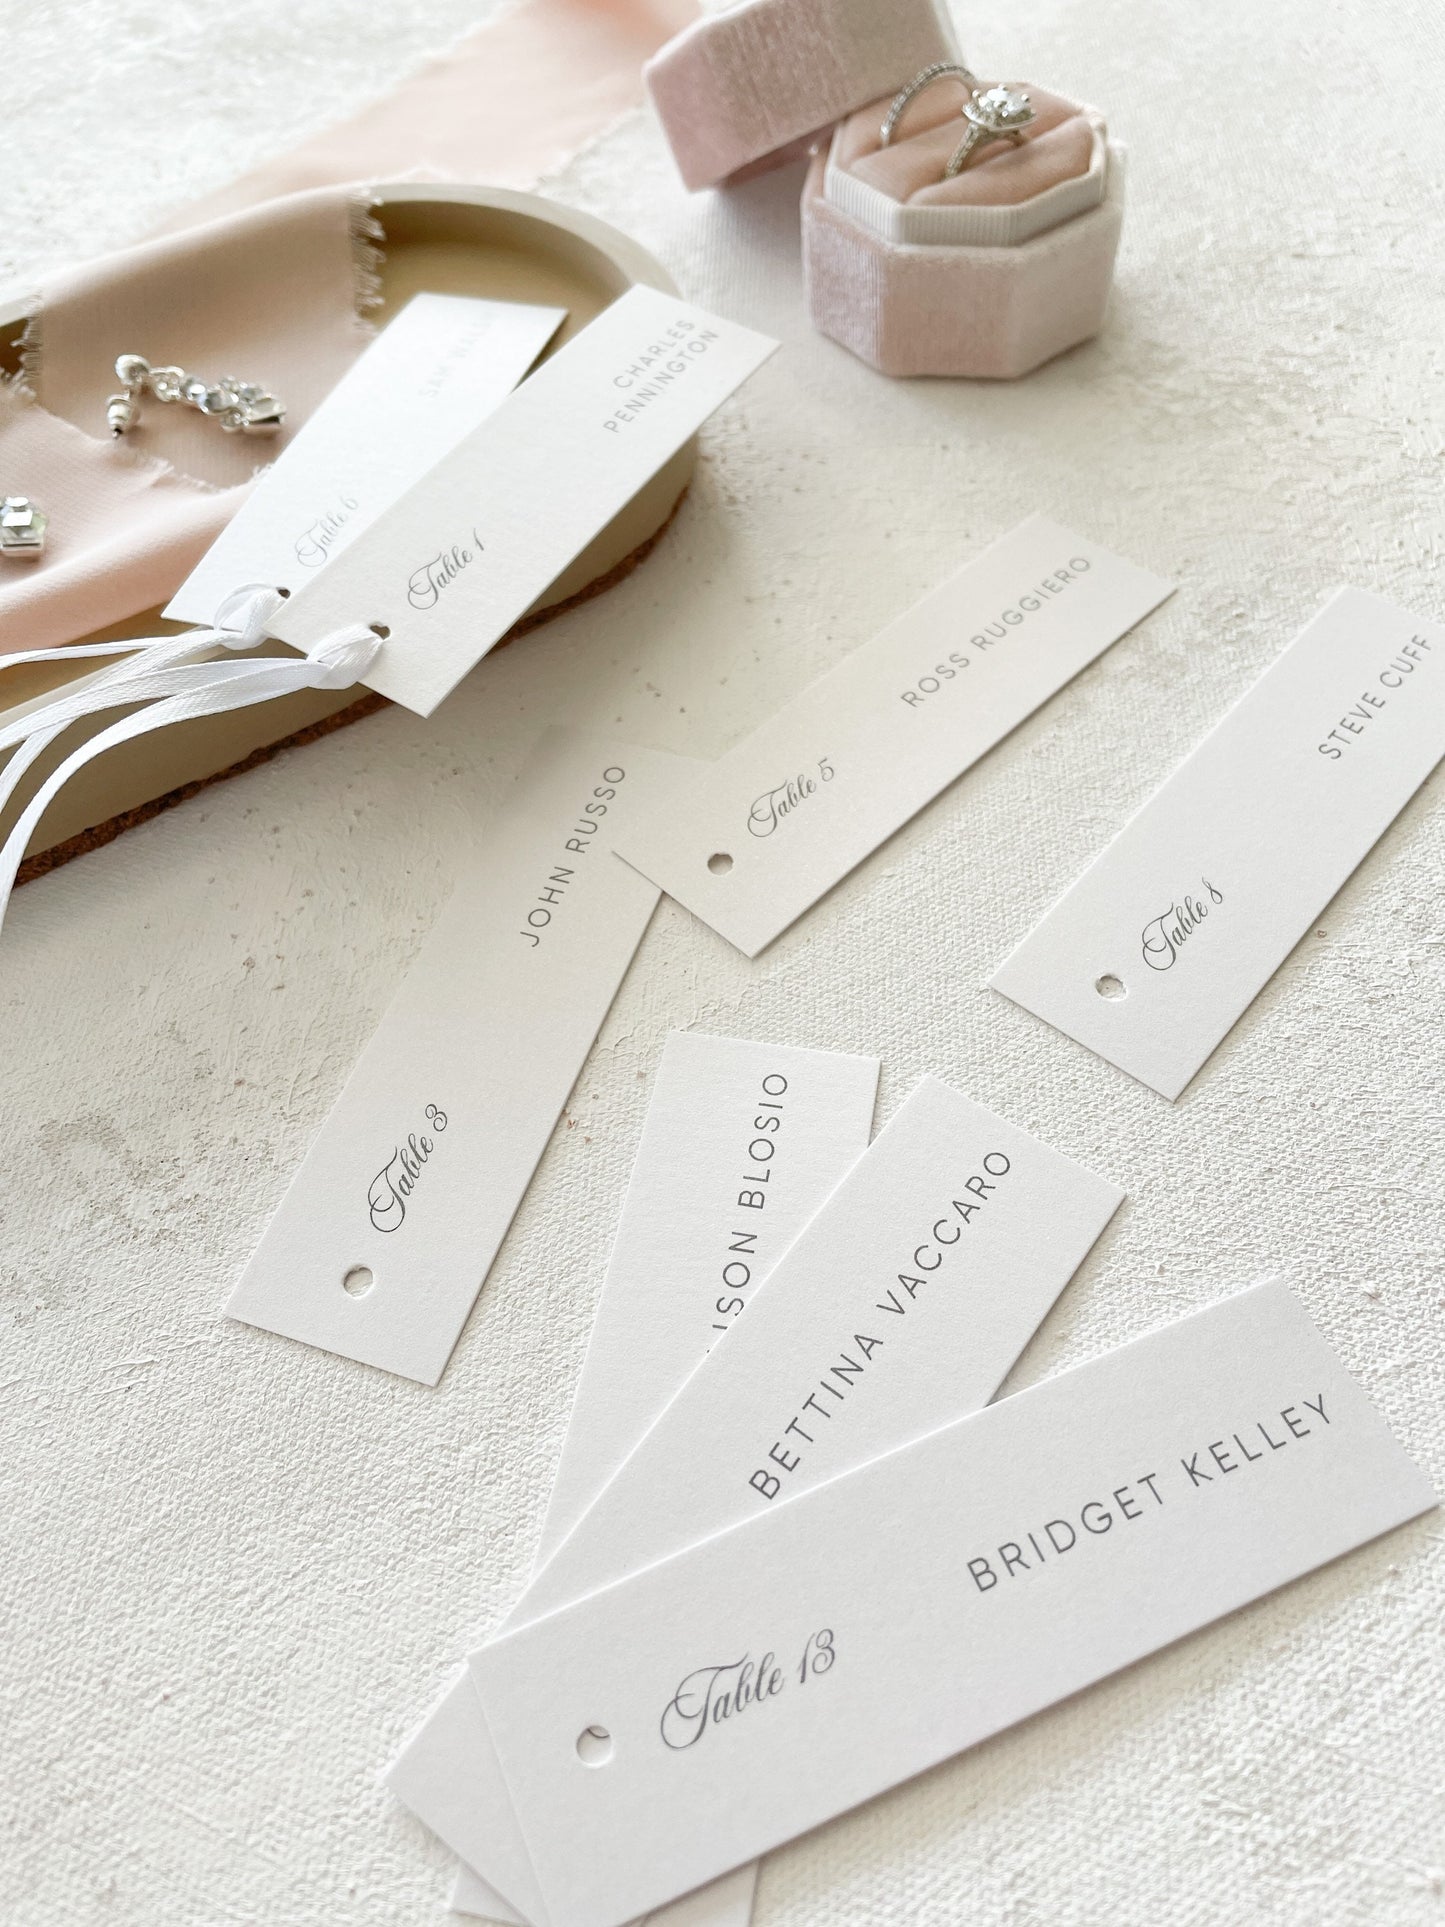 Wedding Name Tags | Set of 10 | Wedding Place Cards Name Tags for Wedding 3.5x1 inches - Style 218